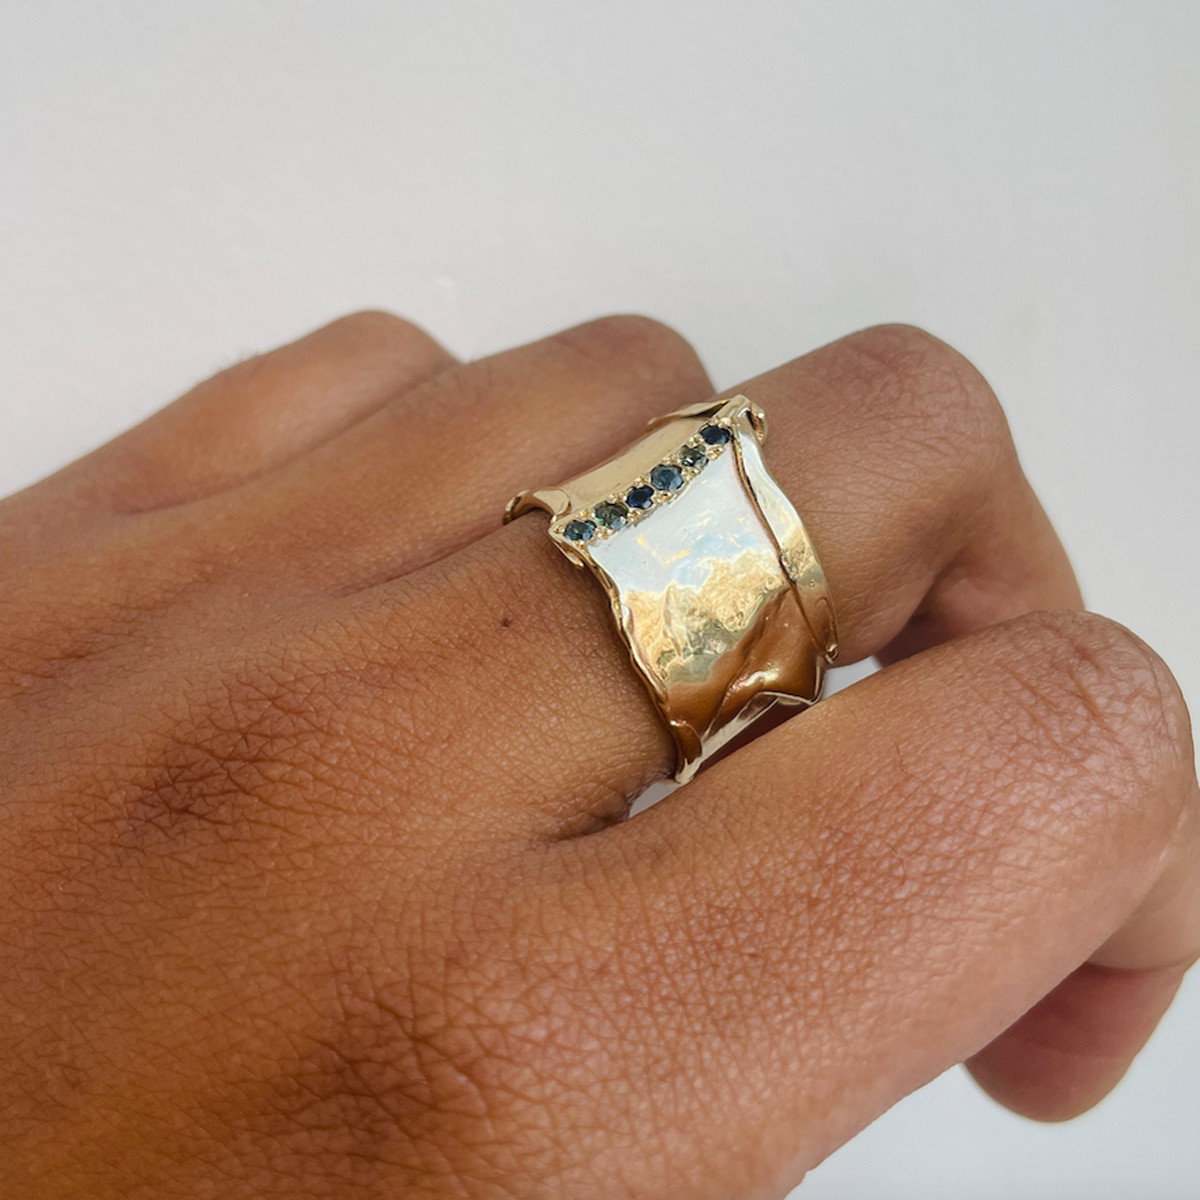 The Athena no.2 Art Ring by Mia Chicco available at tomfoolery London as a part of Art Ring 2022 exhibition.